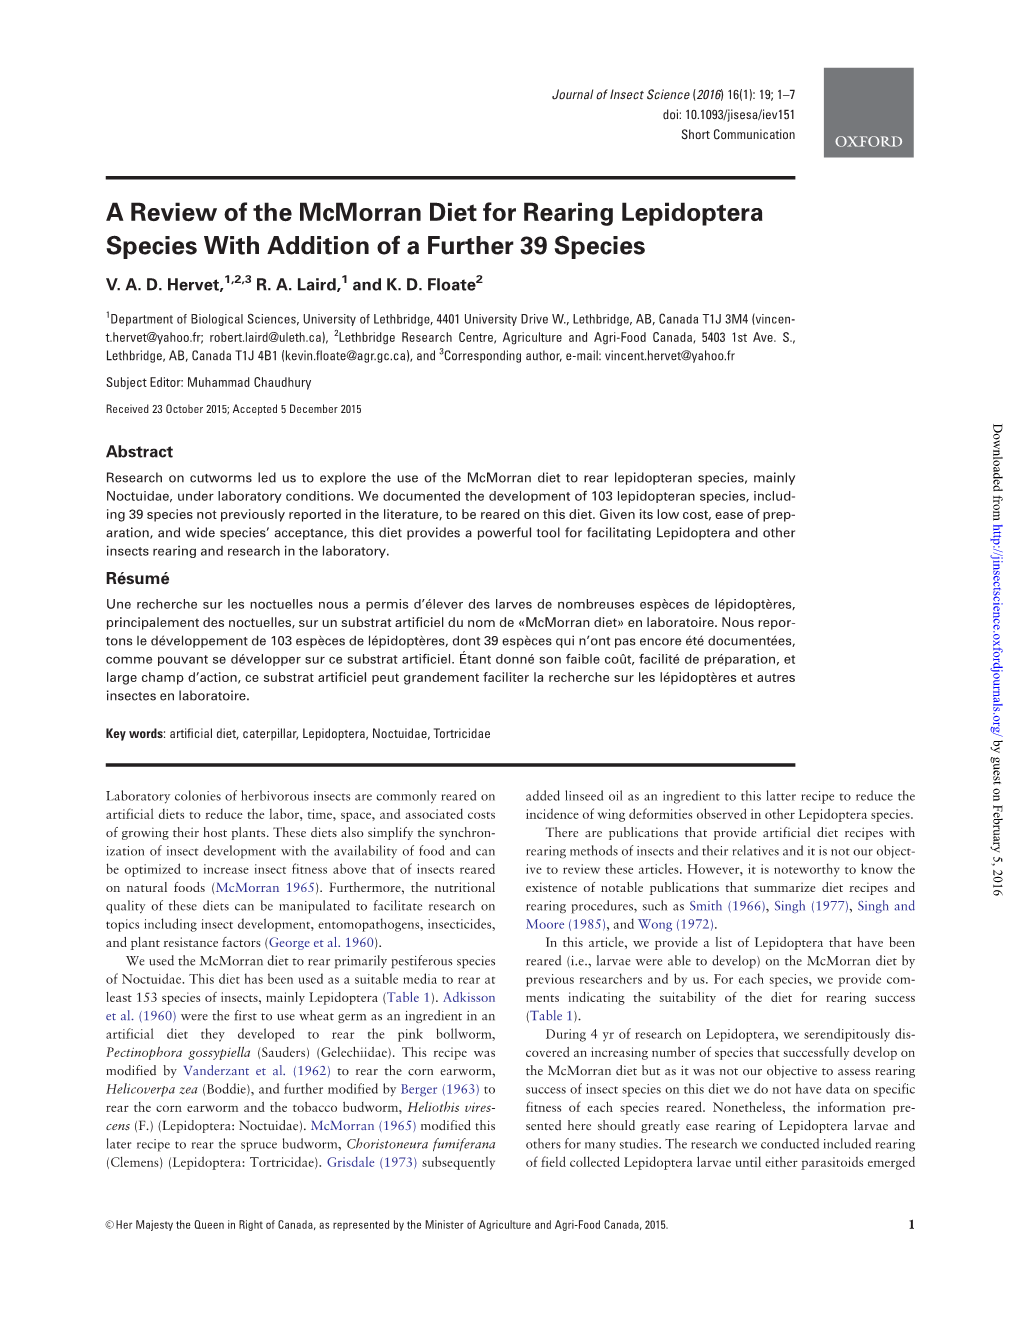 A Review of the Mcmorran Diet for Rearing Lepidoptera Species with Addition of a Further 39 Species